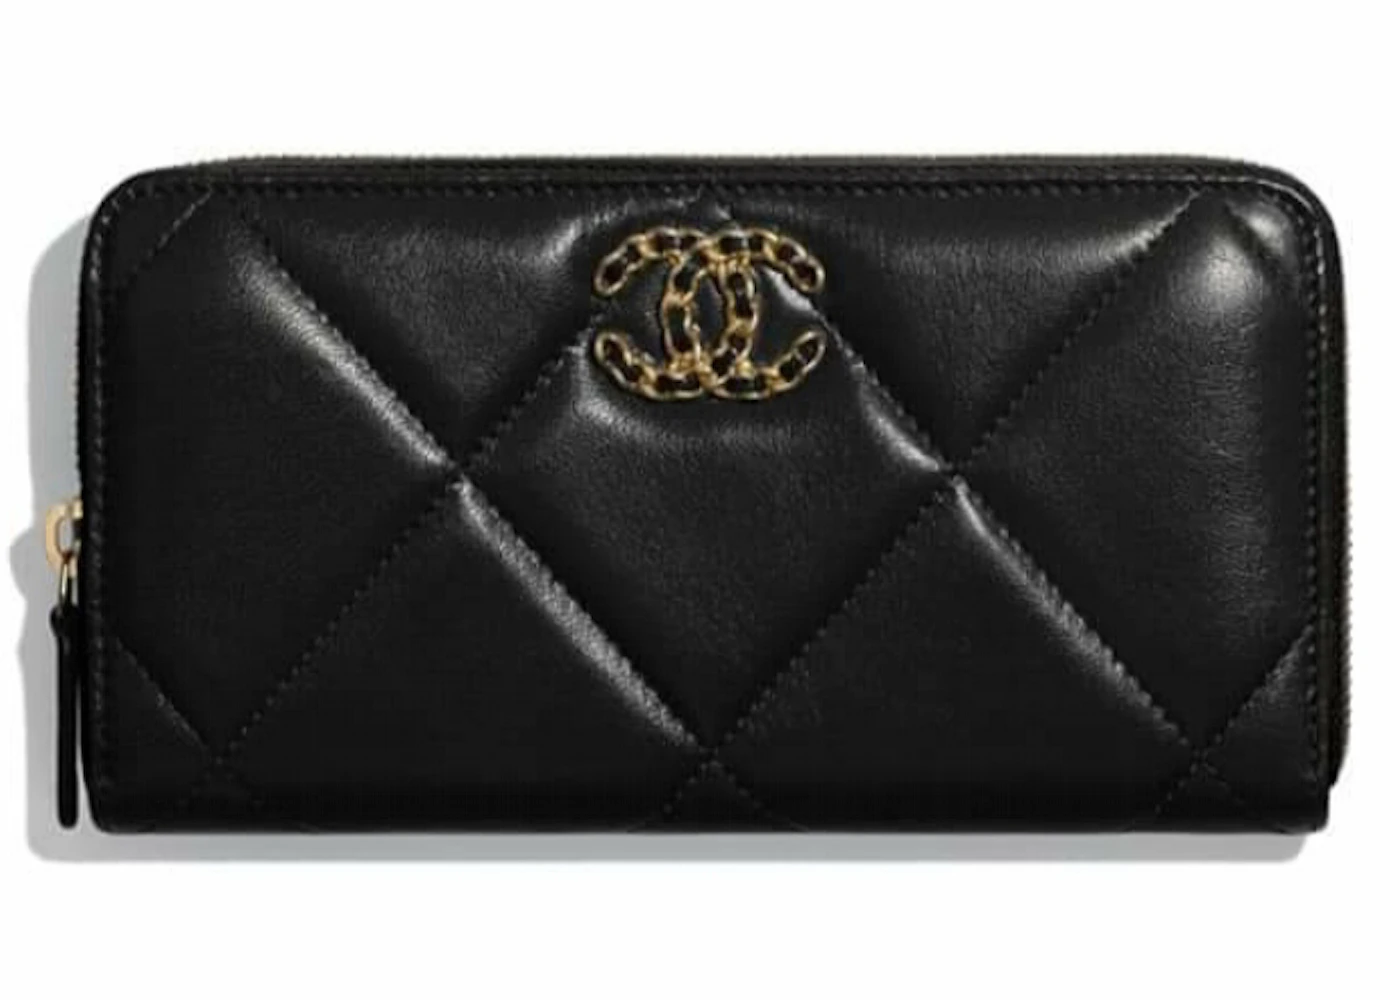 Chanel 19 Long Zipped Wallet Black in Goatskin with Gold/Silver